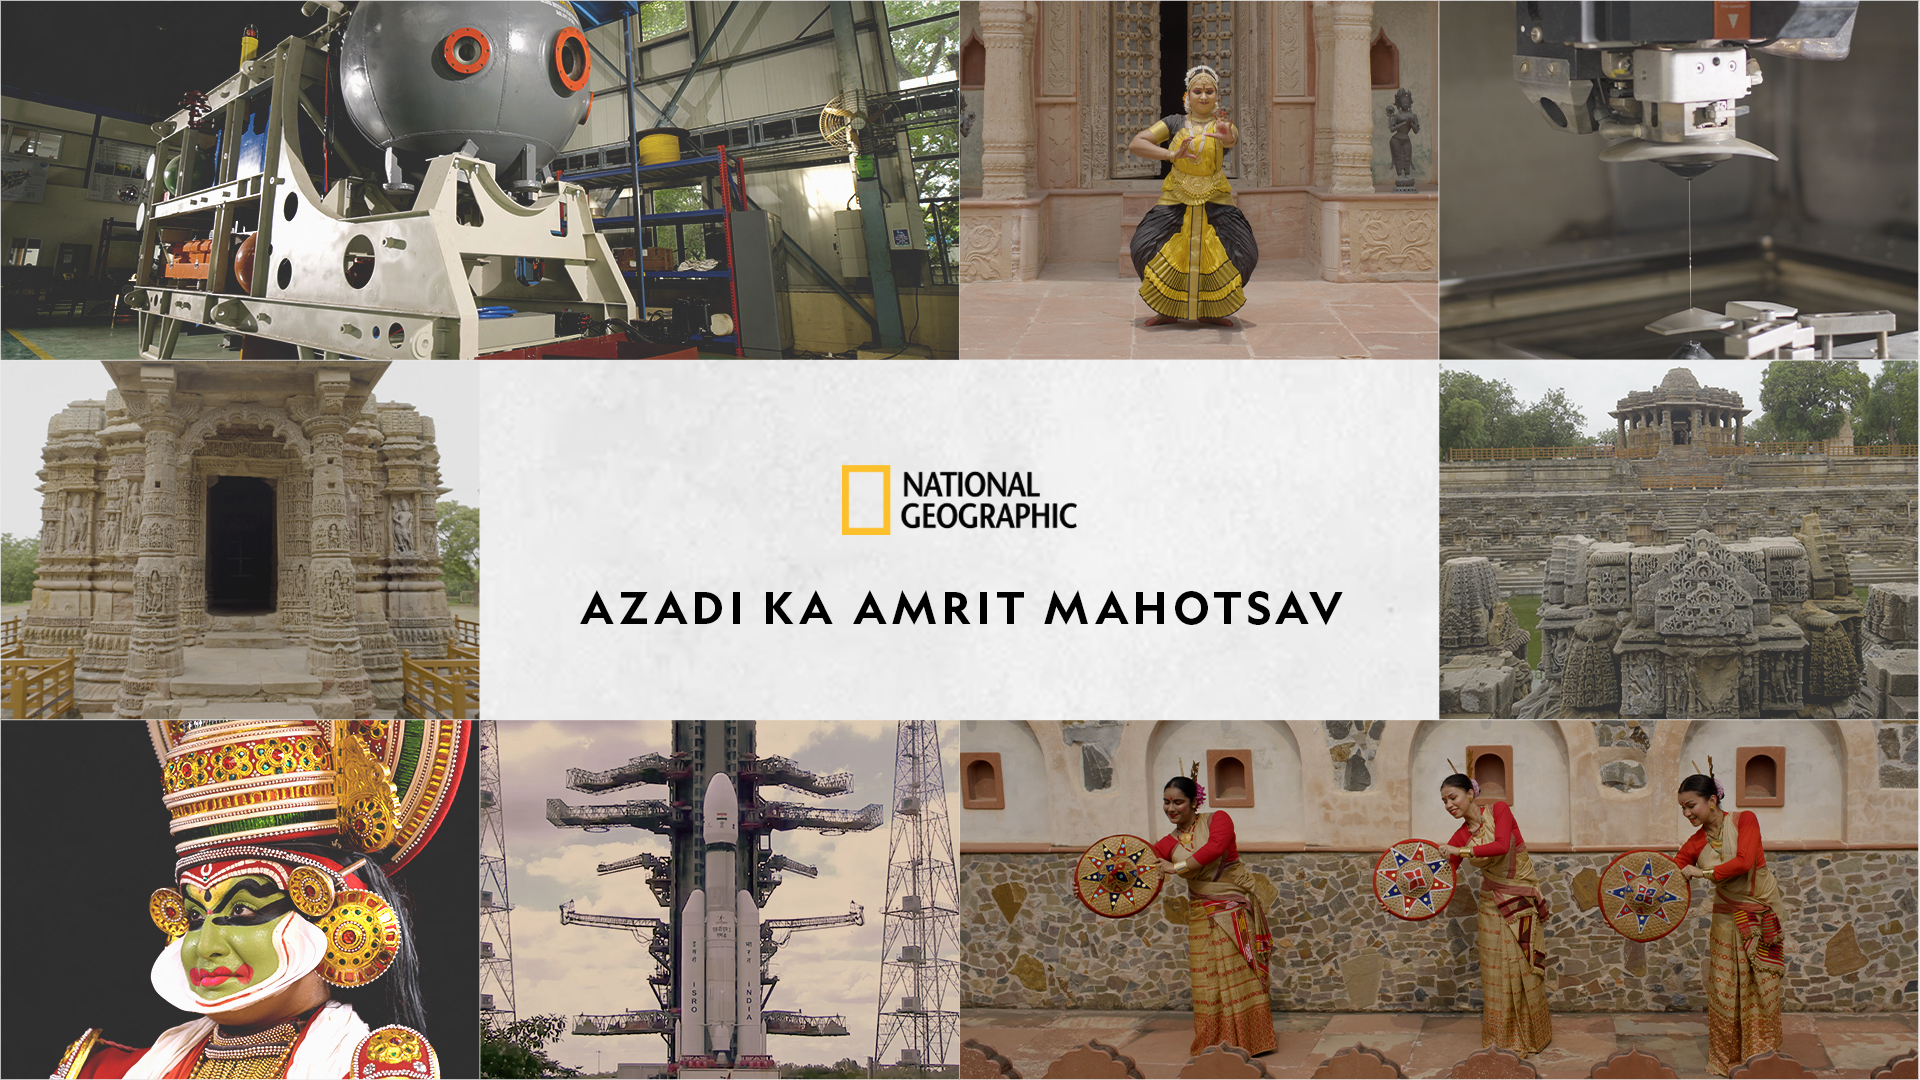 Ministry of Culture celebrates ‘Azadi Ka Amrit Mahotsav’ on National Geographic as an Independence Day special feature